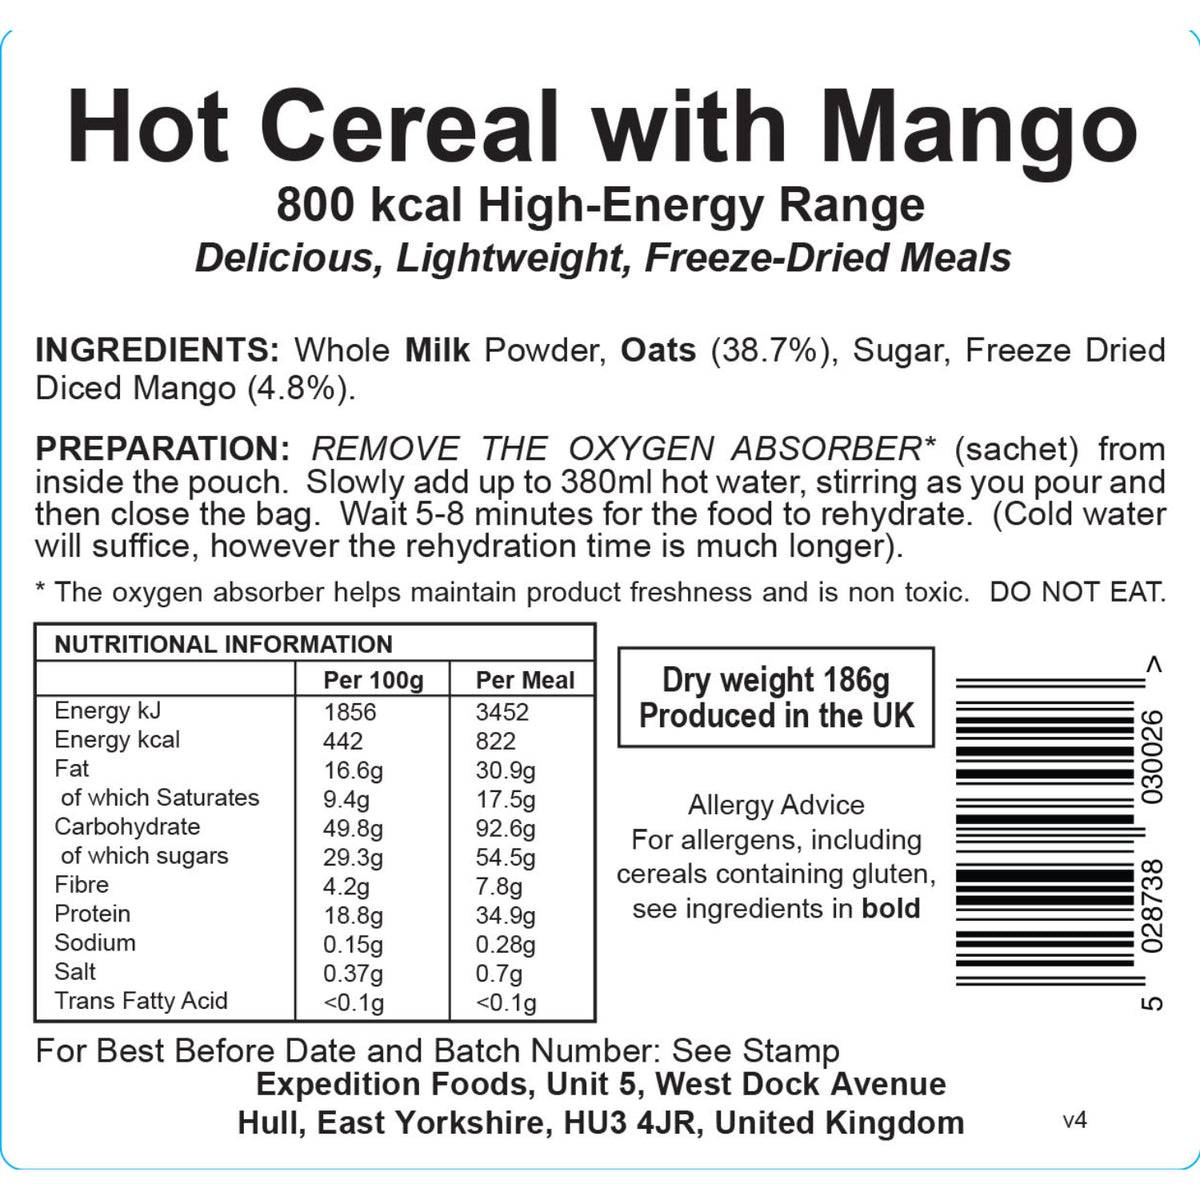 Expedition Foods Hot Cereal with Mango (800kcal)